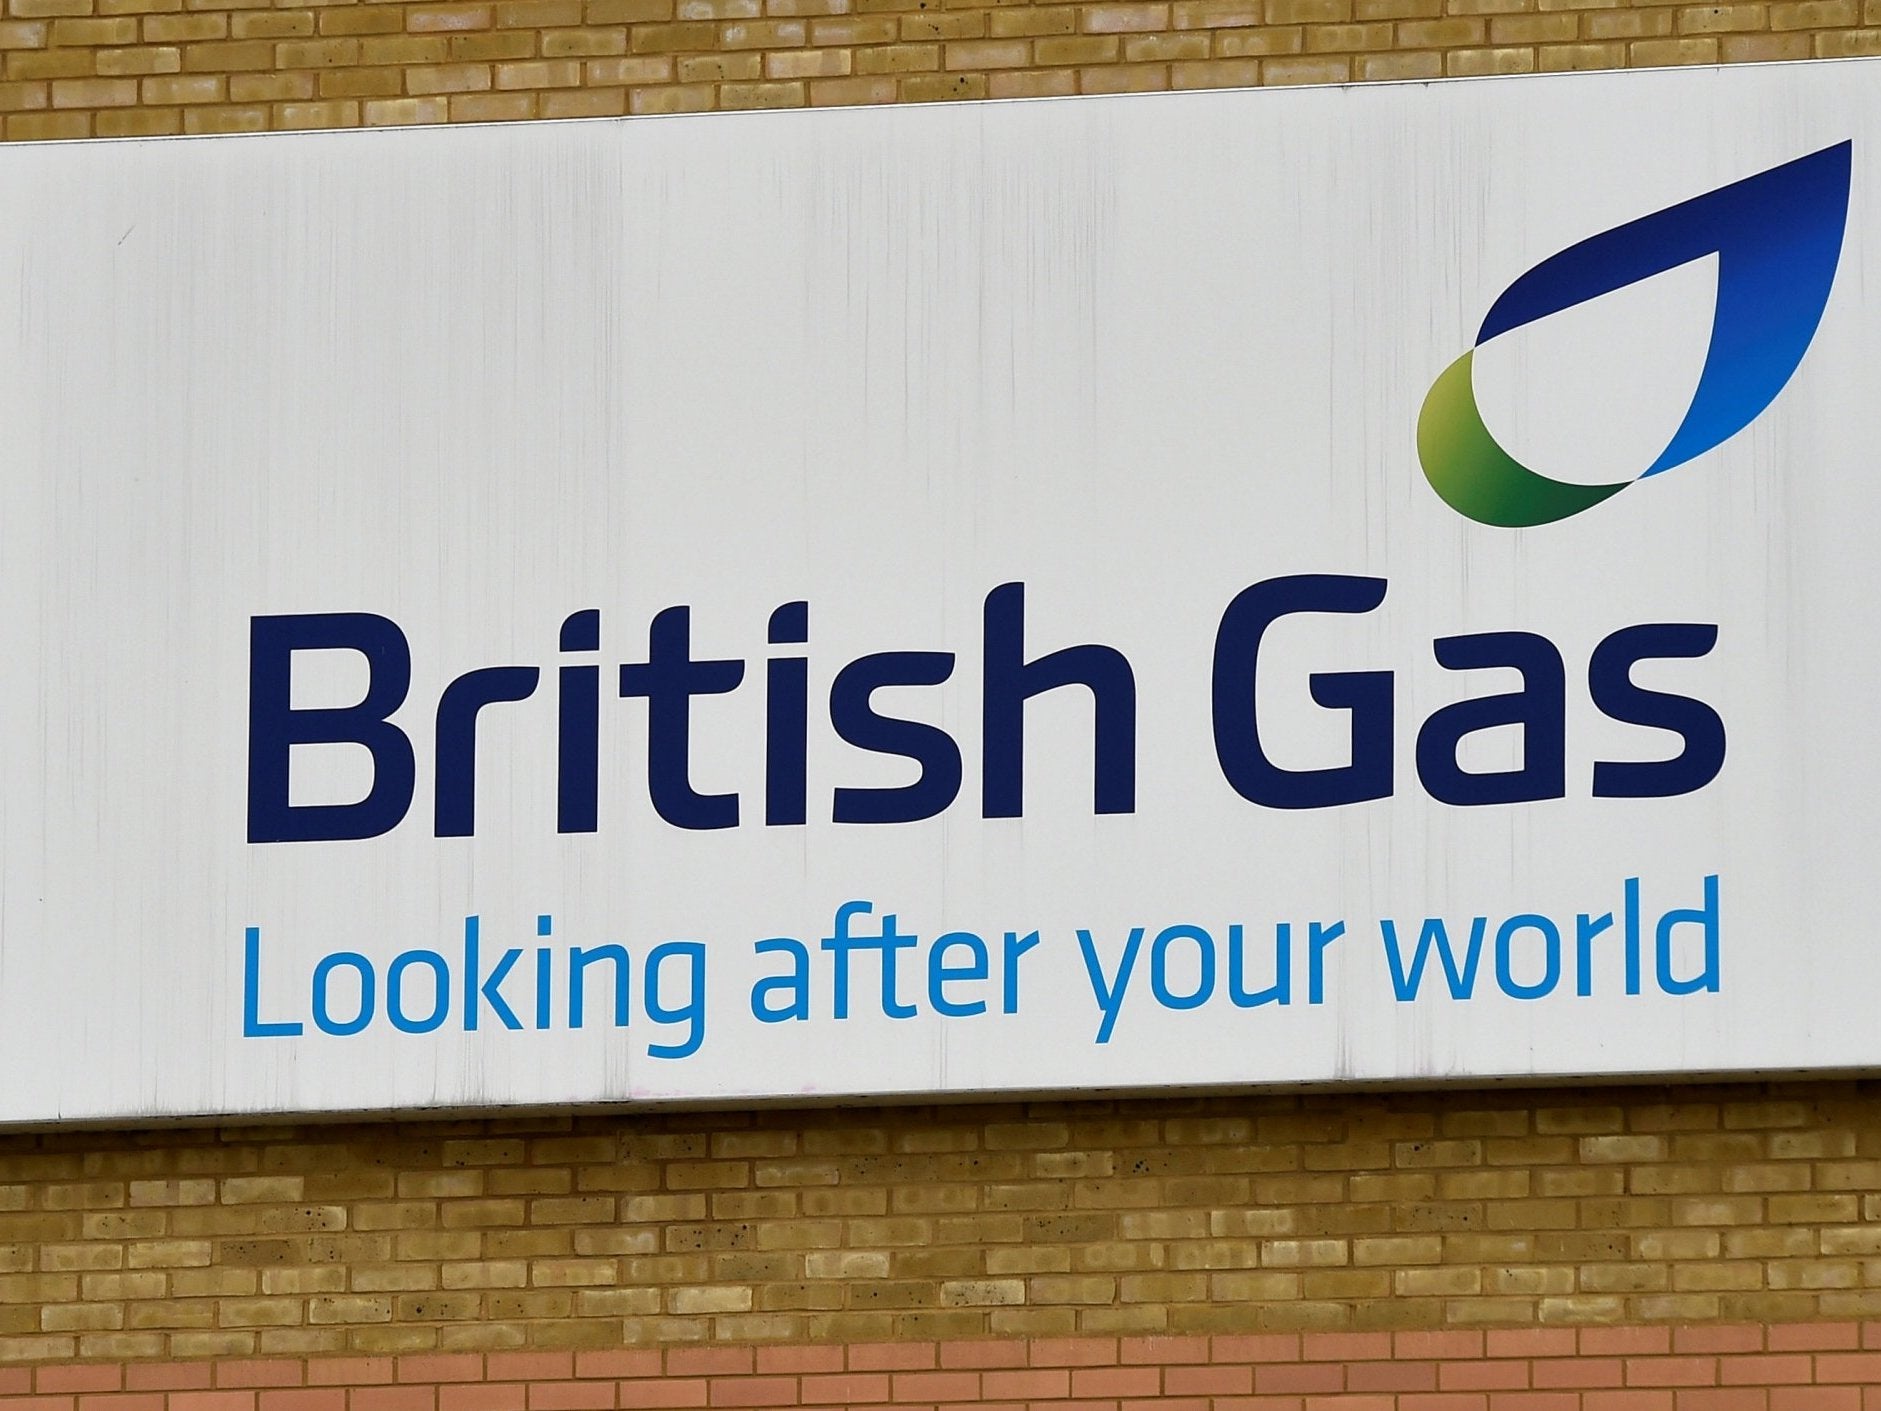 British Gas recently hiked bills for millions of customers after the price cap was increased